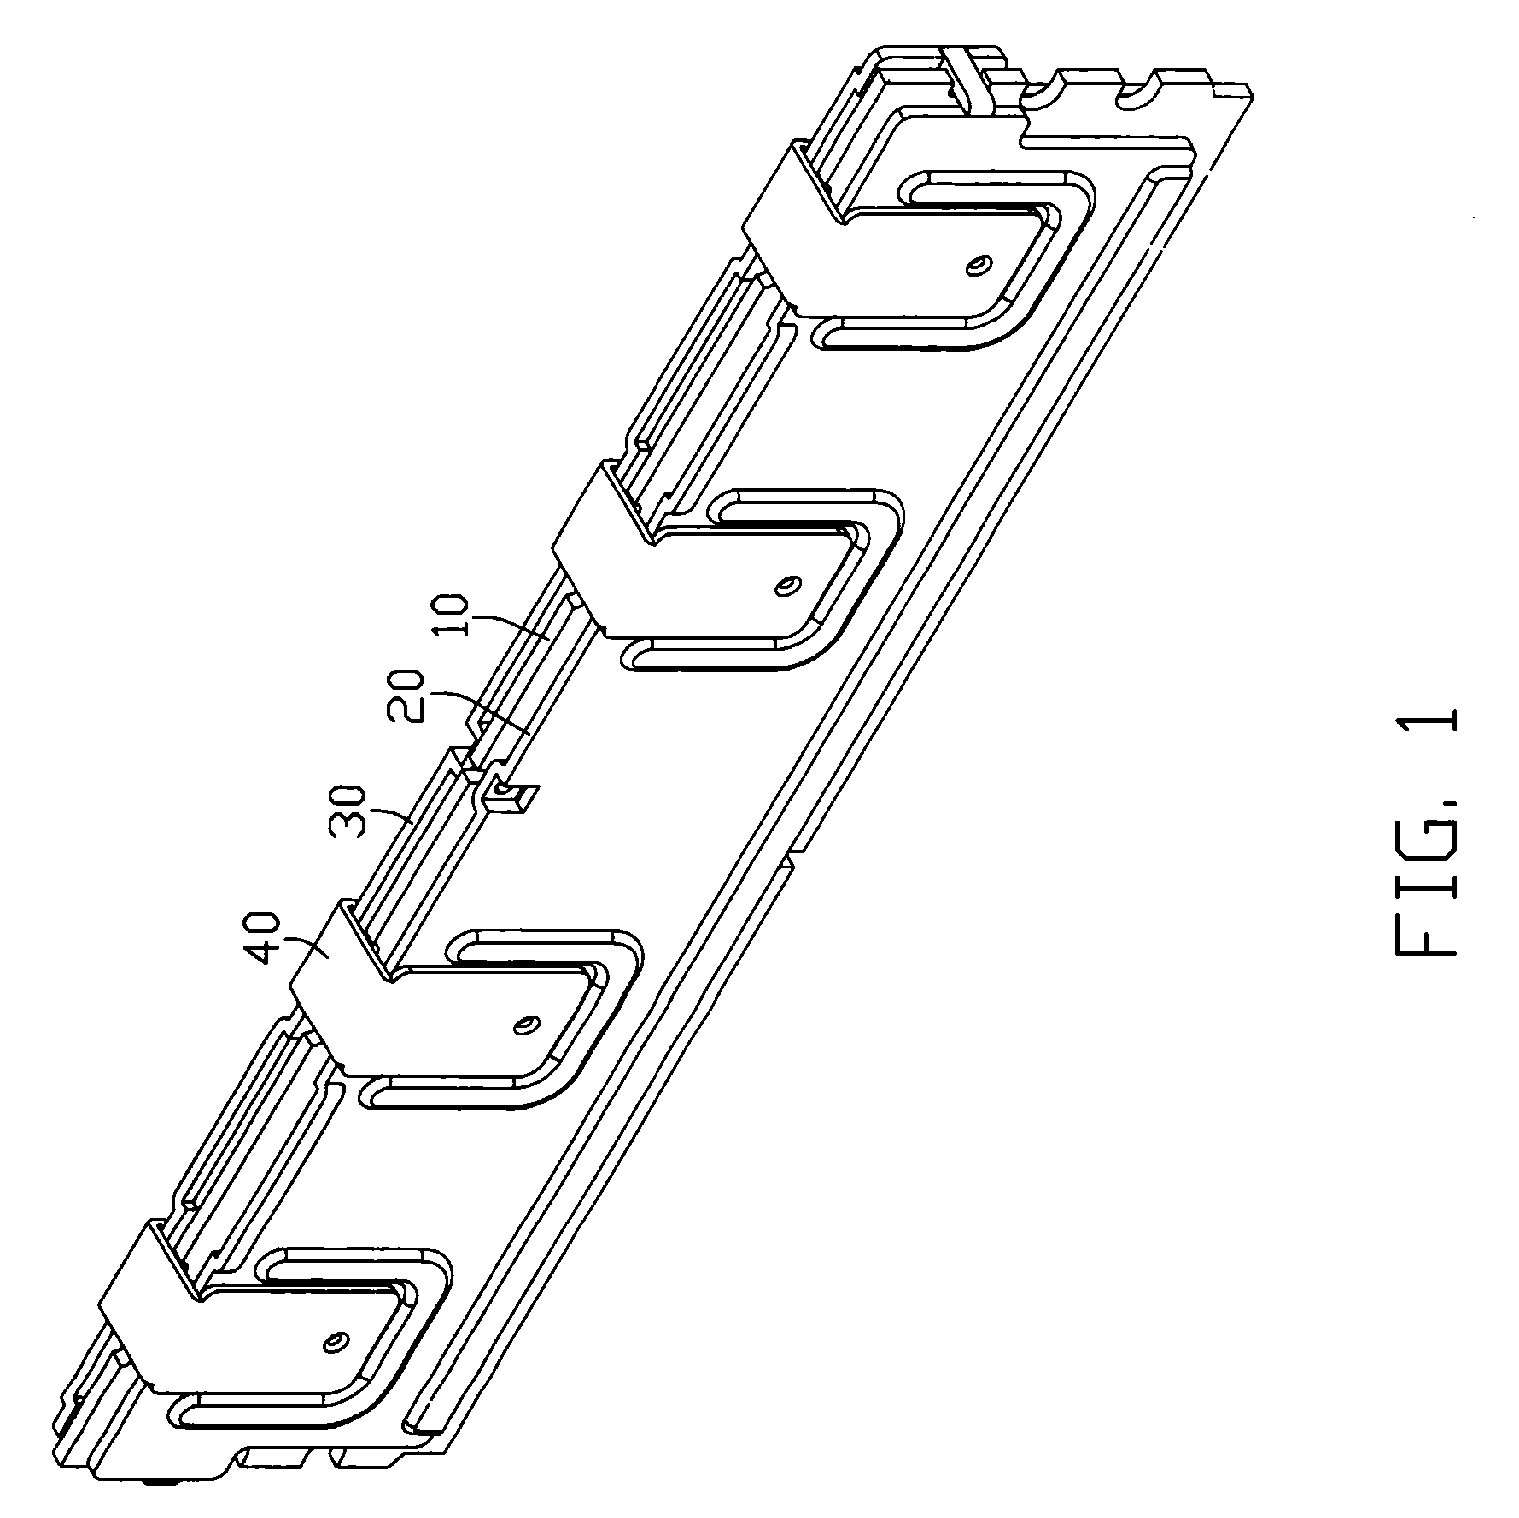 Memory module assembly including a clamp for mounting heat sinks thereon